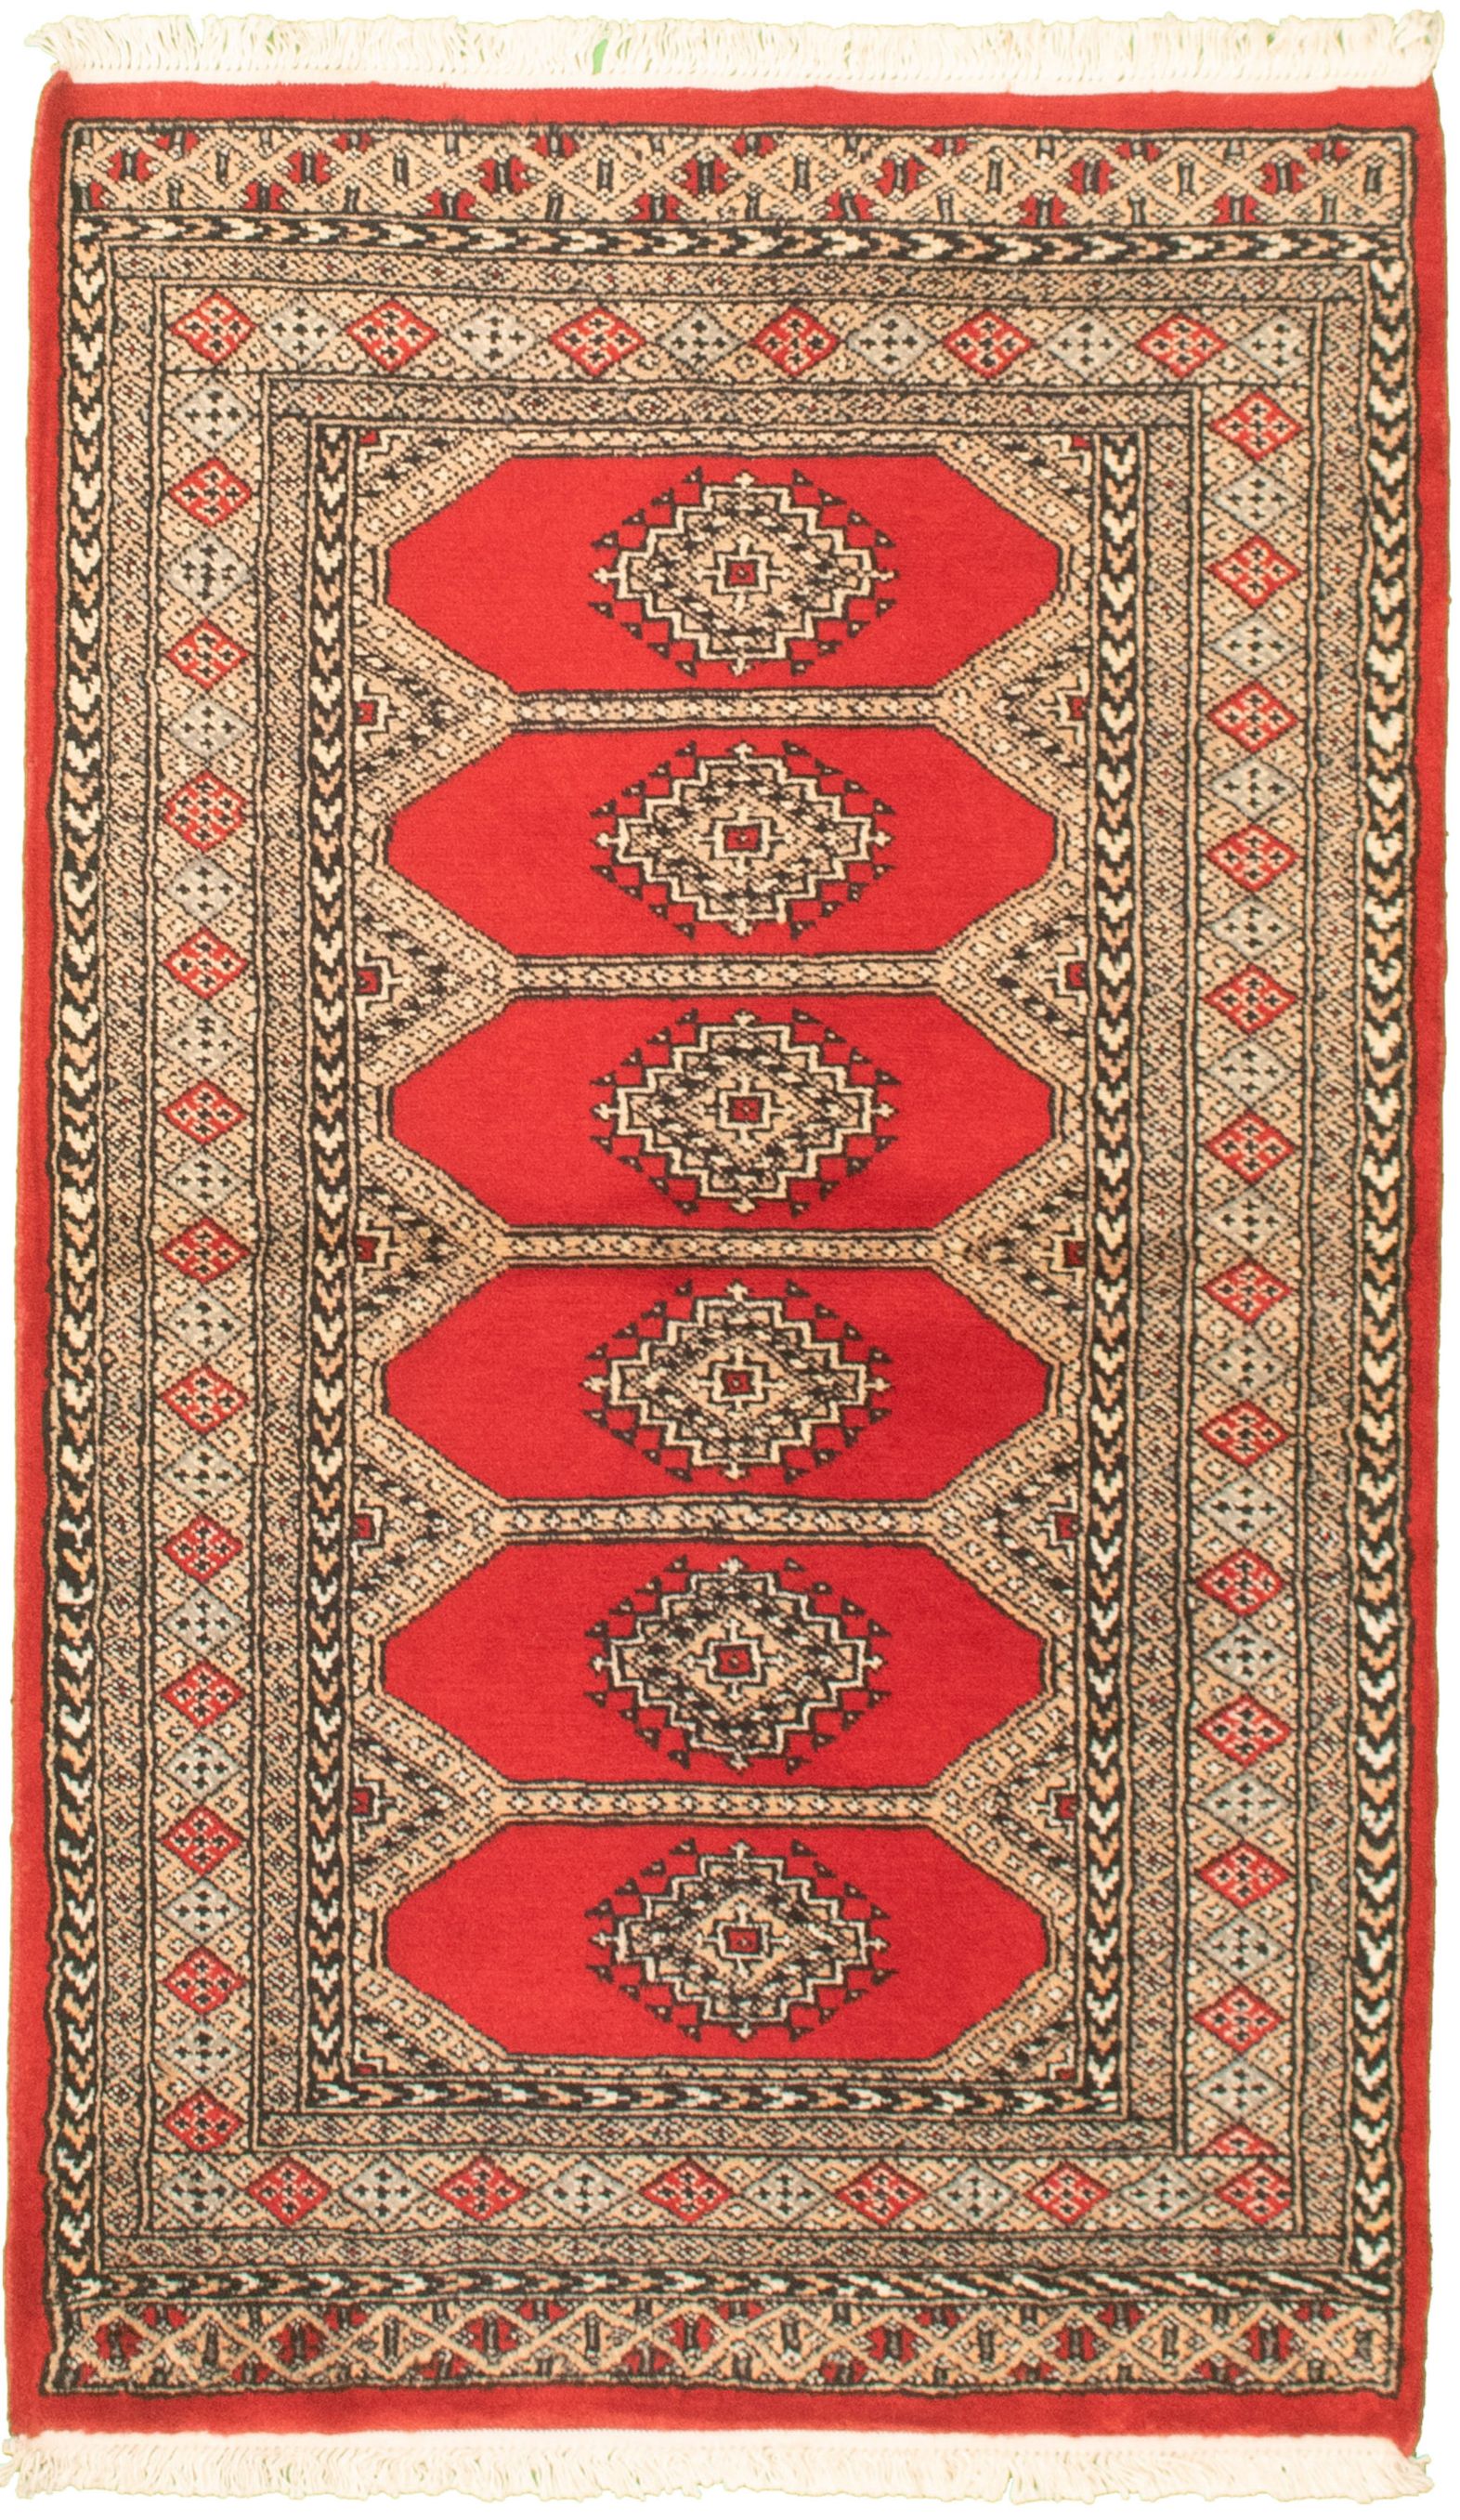 Hand-knotted Finest Peshawar Bokhara Red Wool Rug 3'2" x 5'3"  Size: 3'2" x 5'3"  